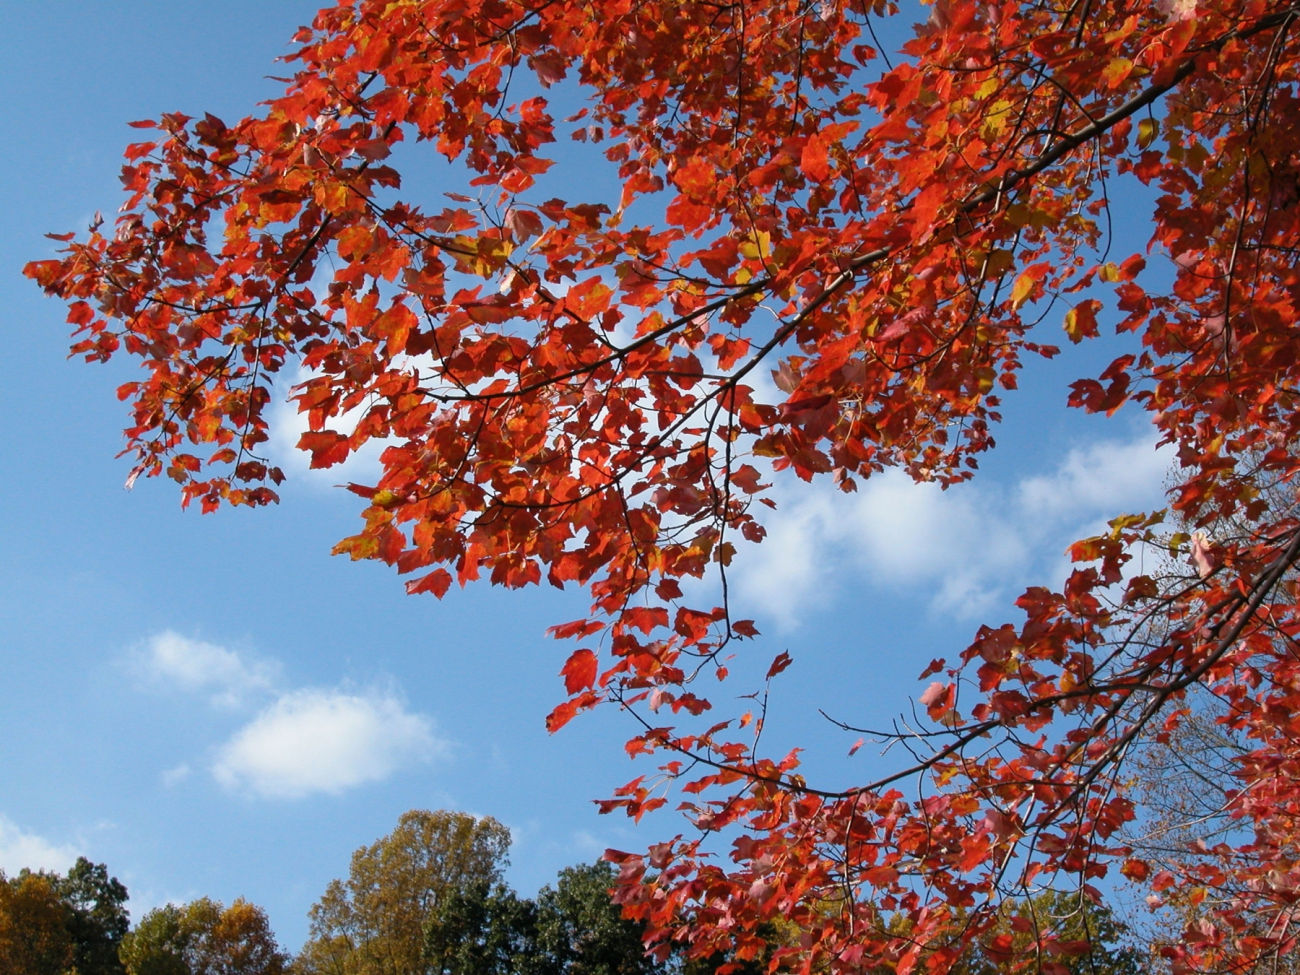 Bright red leaves, puffy cumulus, and blue sky on an autumn afternoon